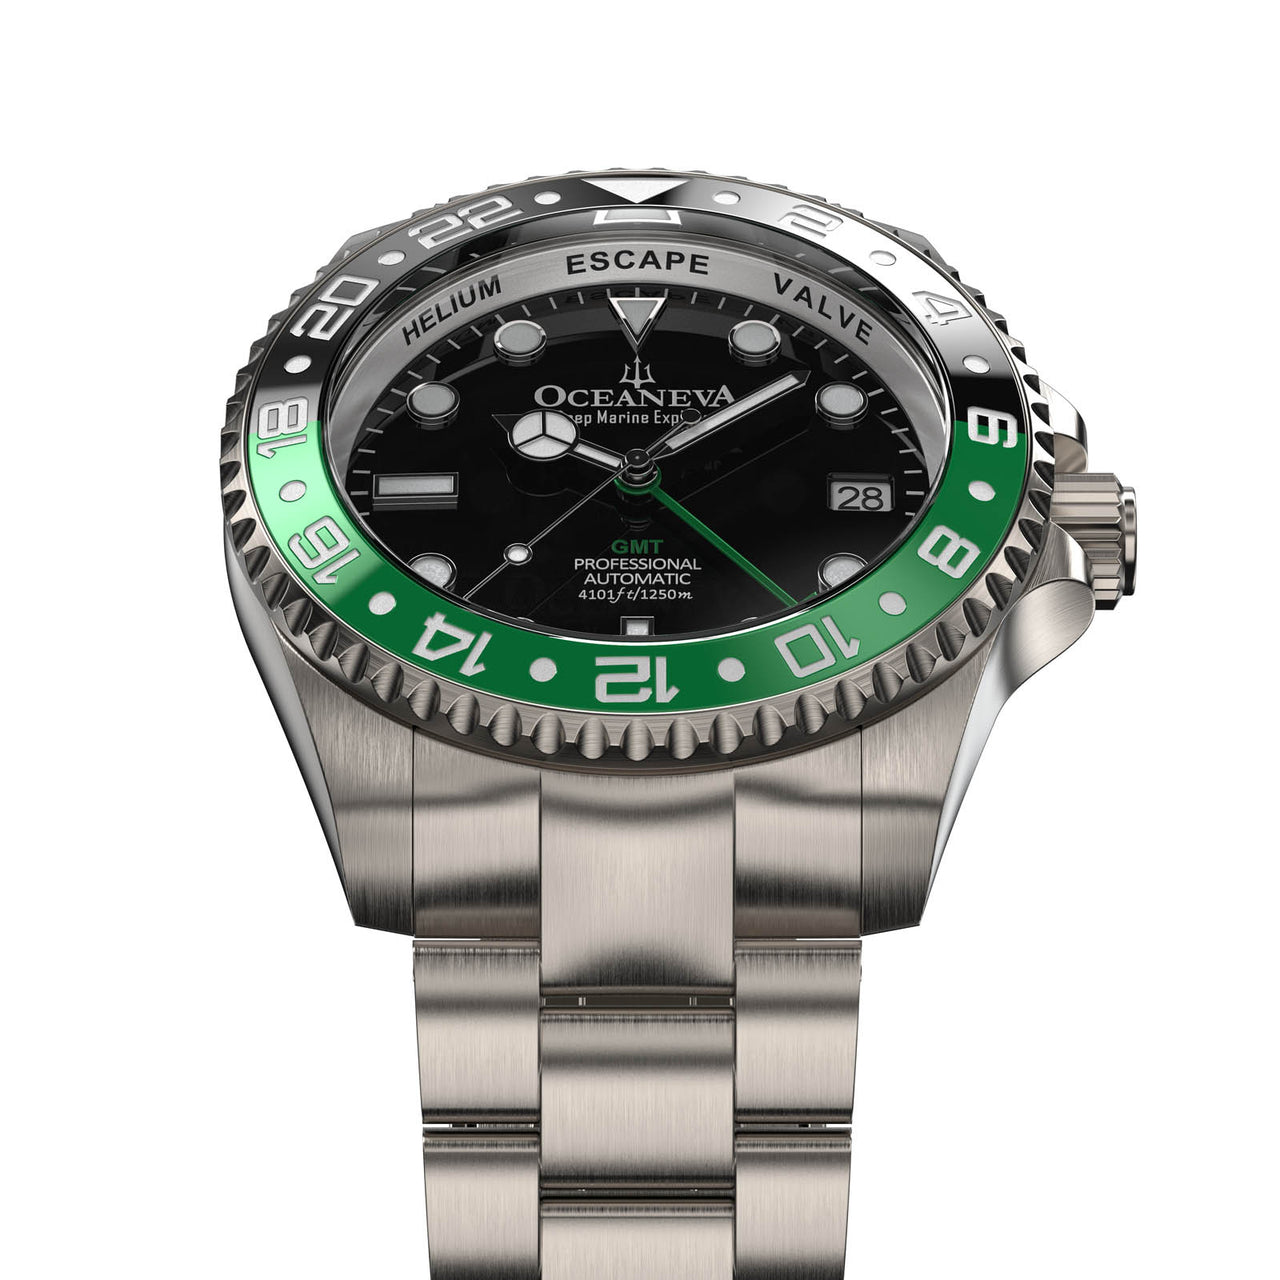 Elegant Oceaneva Pro Diver Watch showcasing 24 jewels and 41-hour power reserve